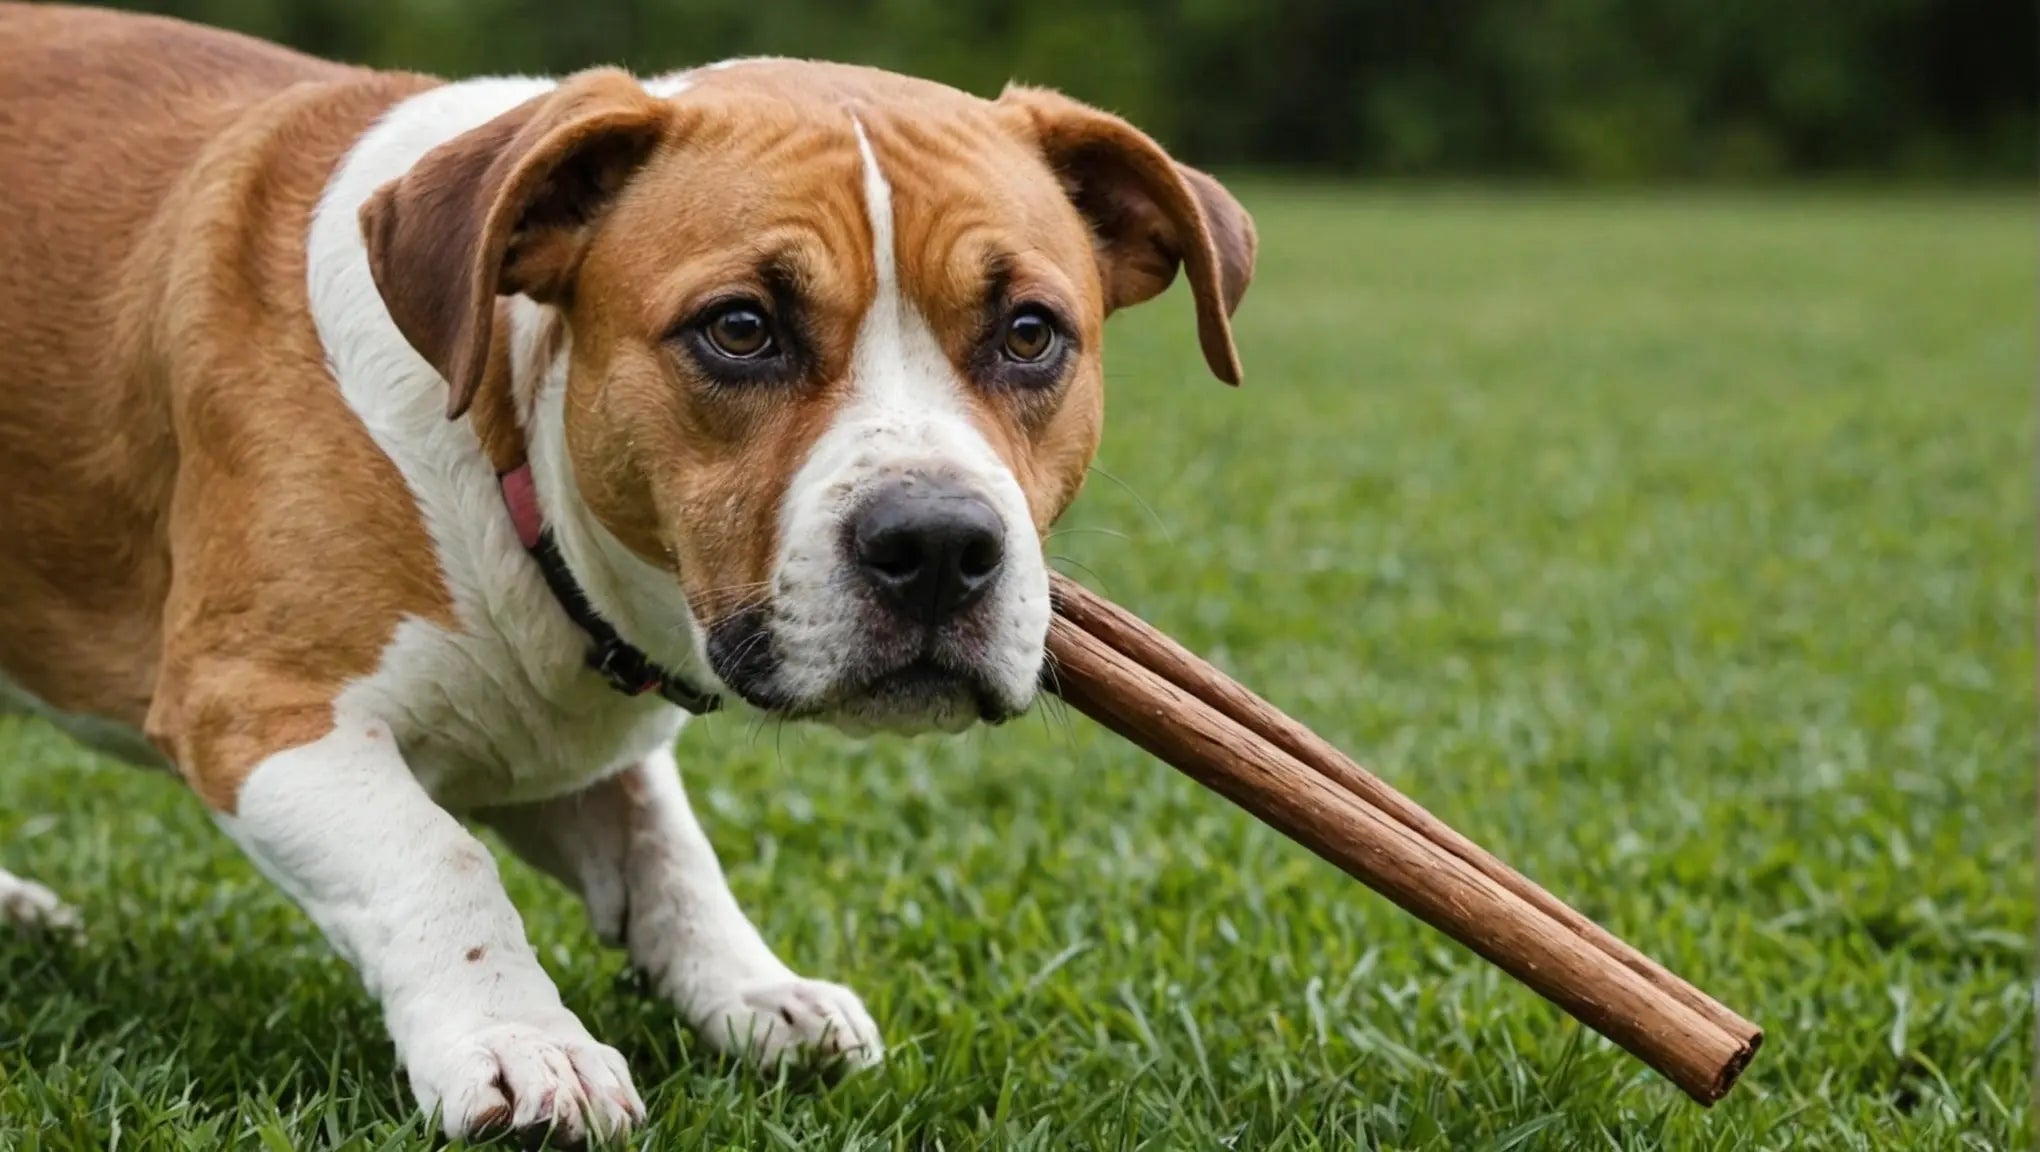 Give Your Dog a Long-Lasting and Delicious Chew with Bully Sticks